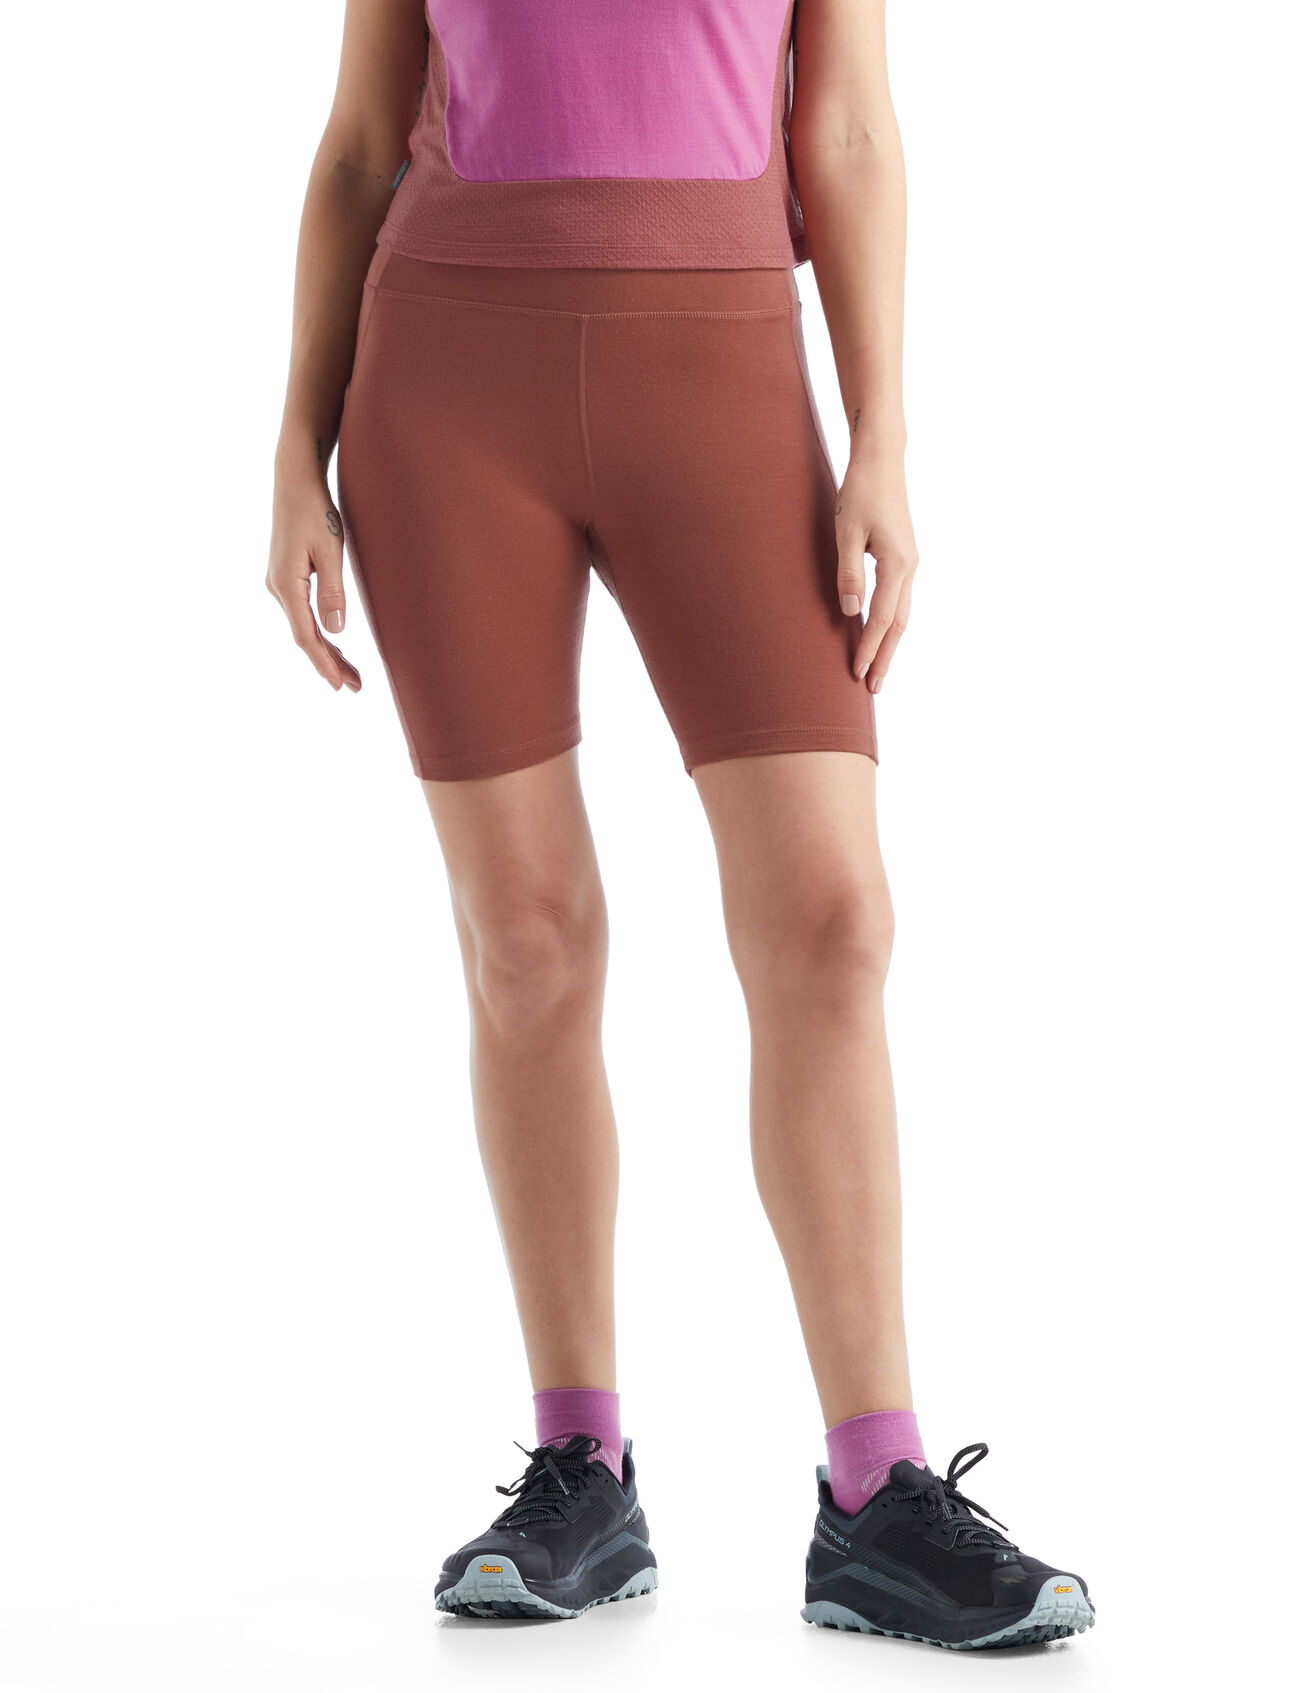 Womens Merino Fastray High Rise Shorts Functional, form-fitting shorts for active performance on or off the trail, the Fastray High Rise Shorts feature a stretchy merino wool blend with a high waist for added coverage.